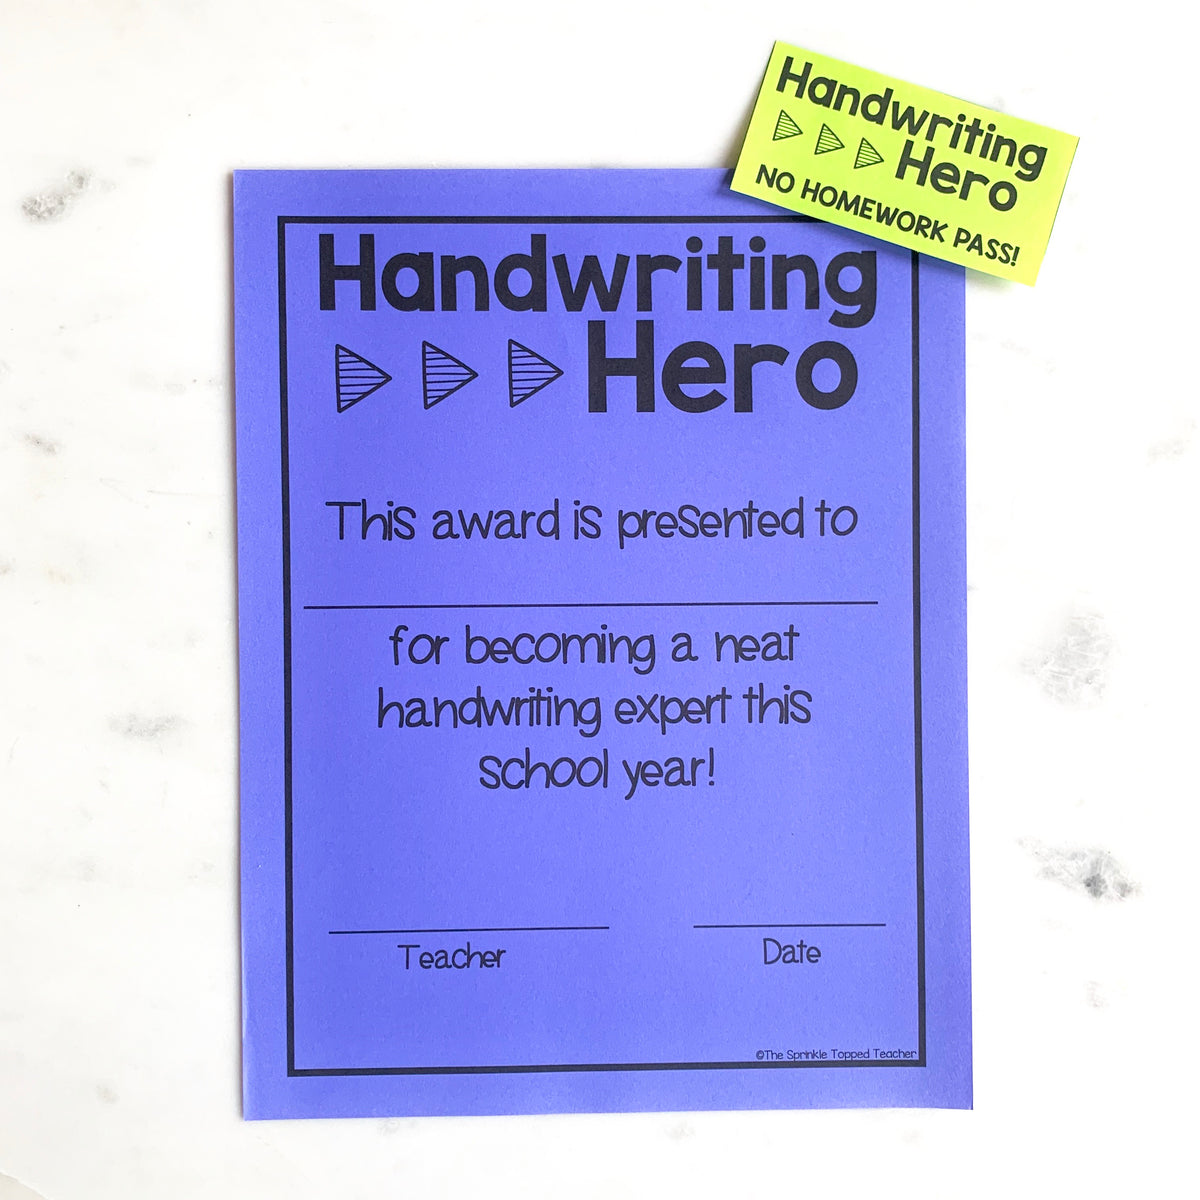 Handwriting Practice Sheets: Narrow-ruled for tweens, teens and adults